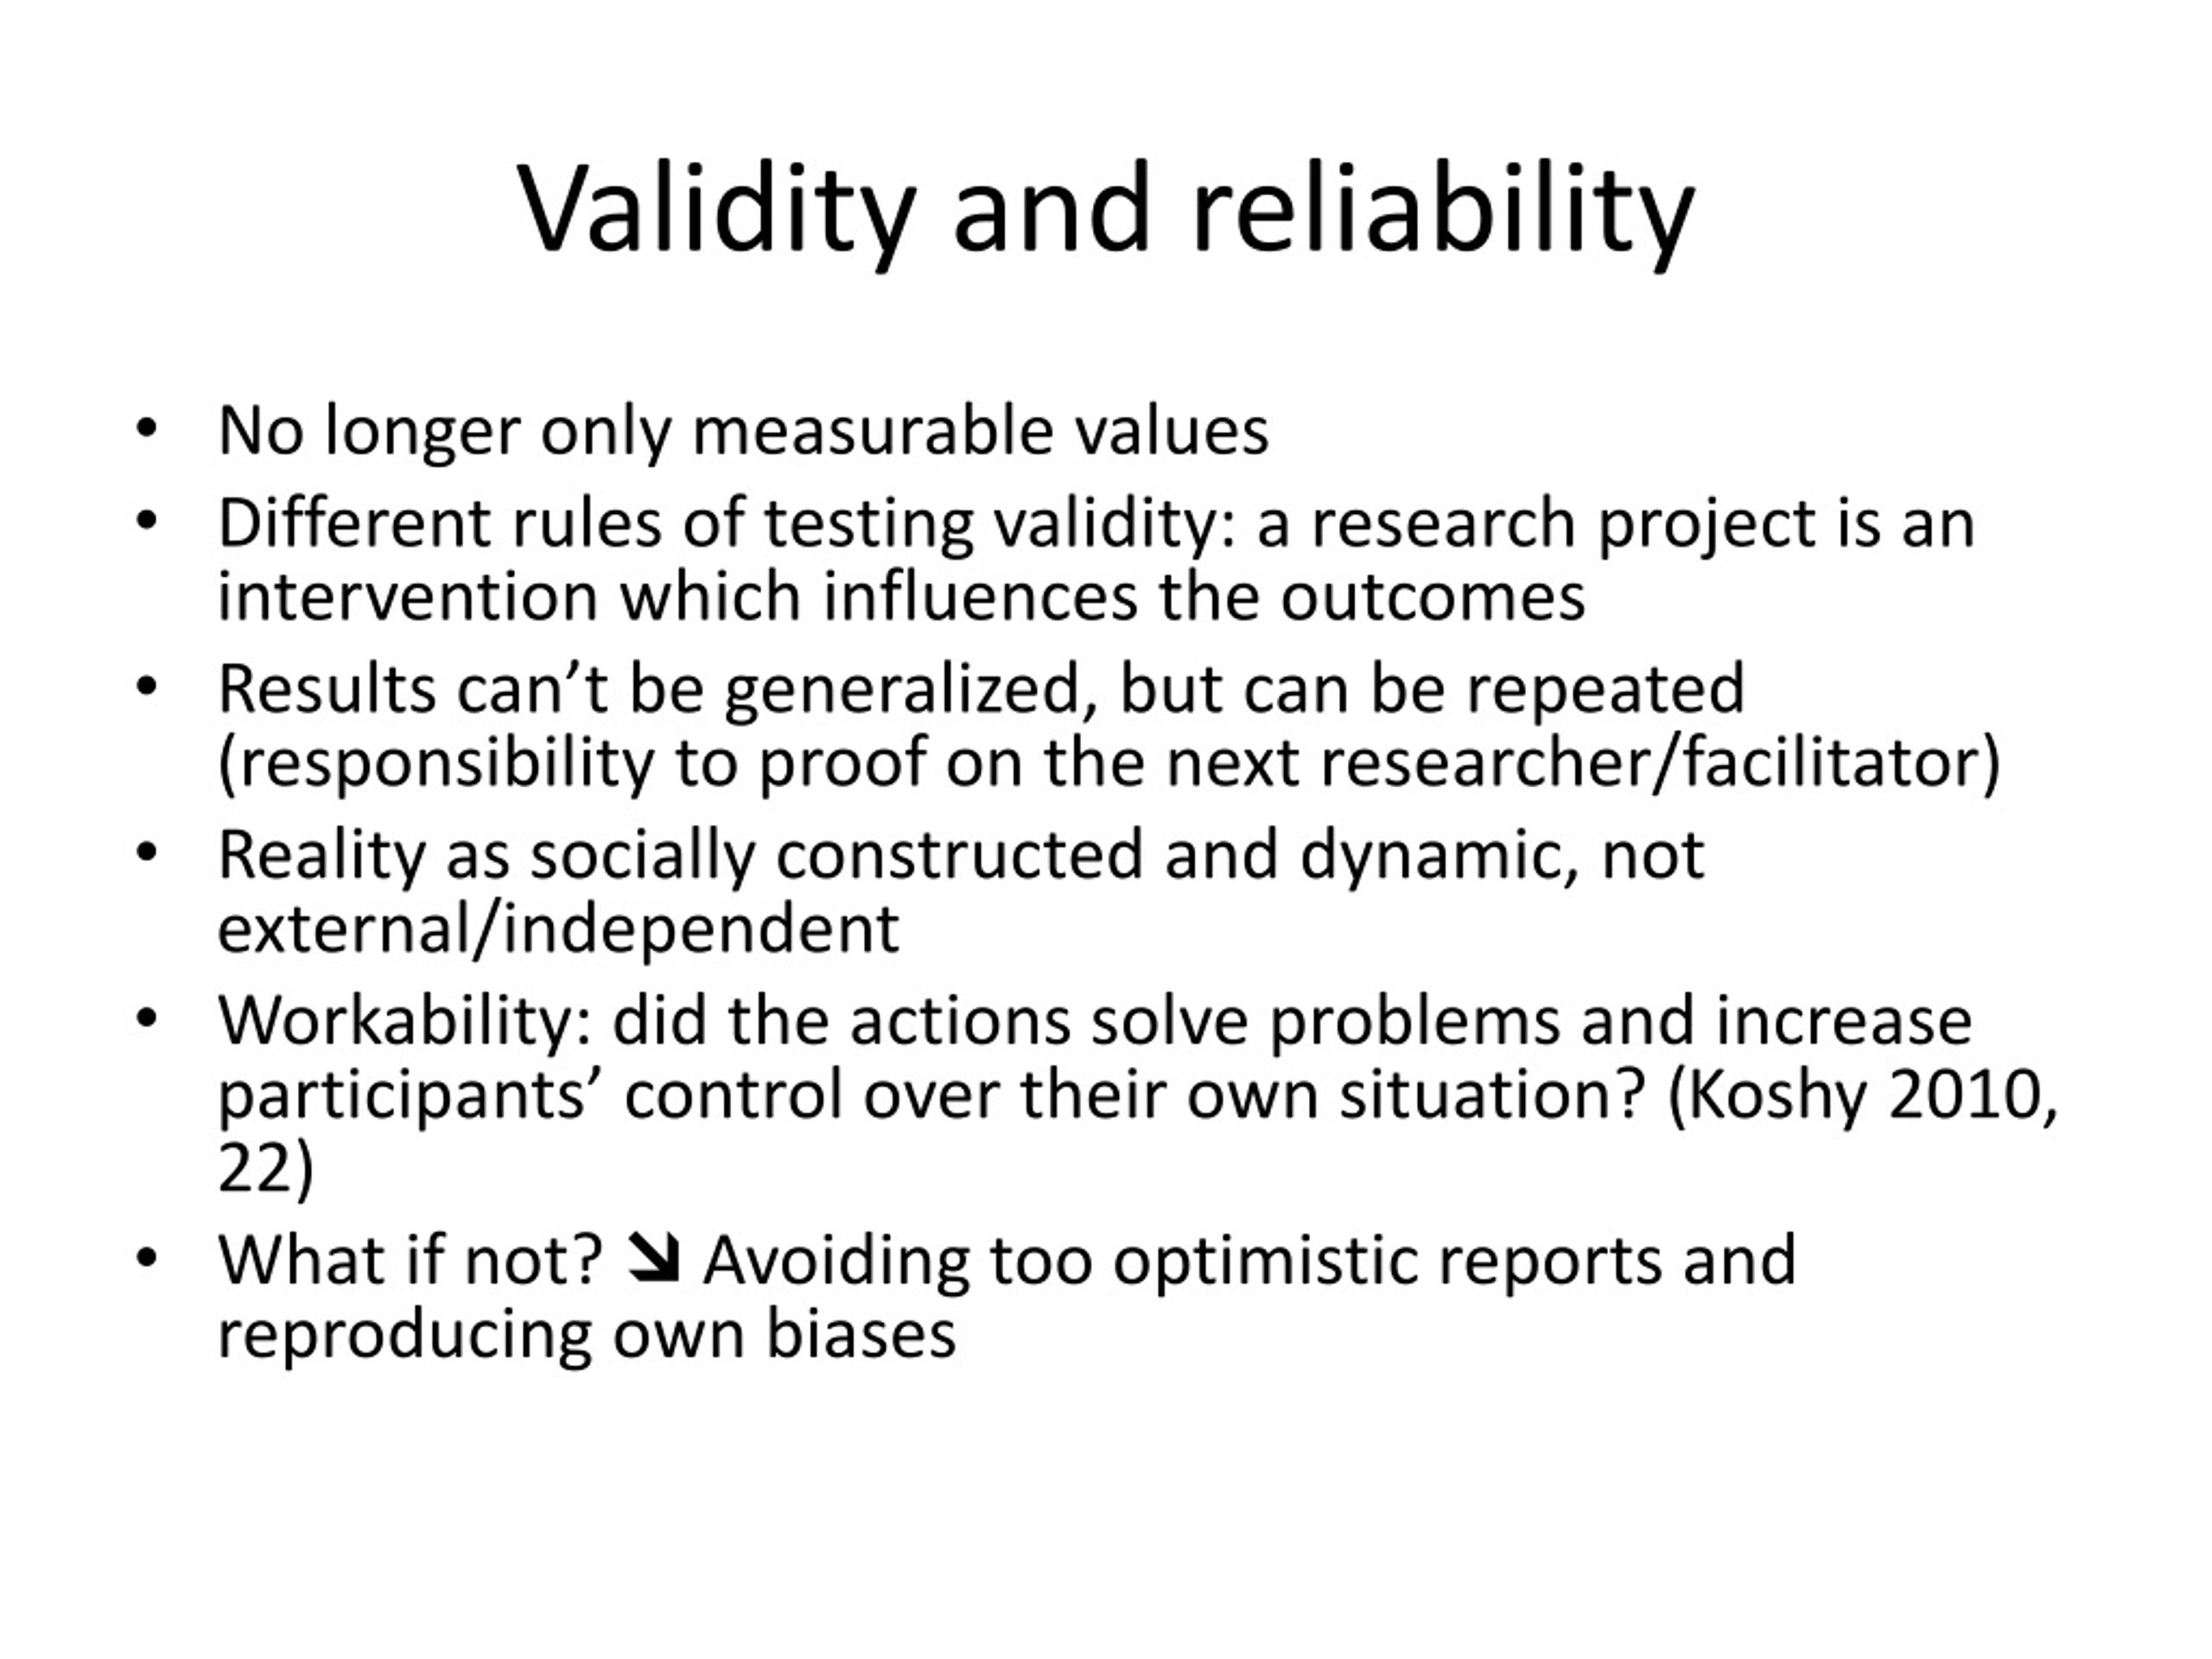 importance of validity and reliability in assessment